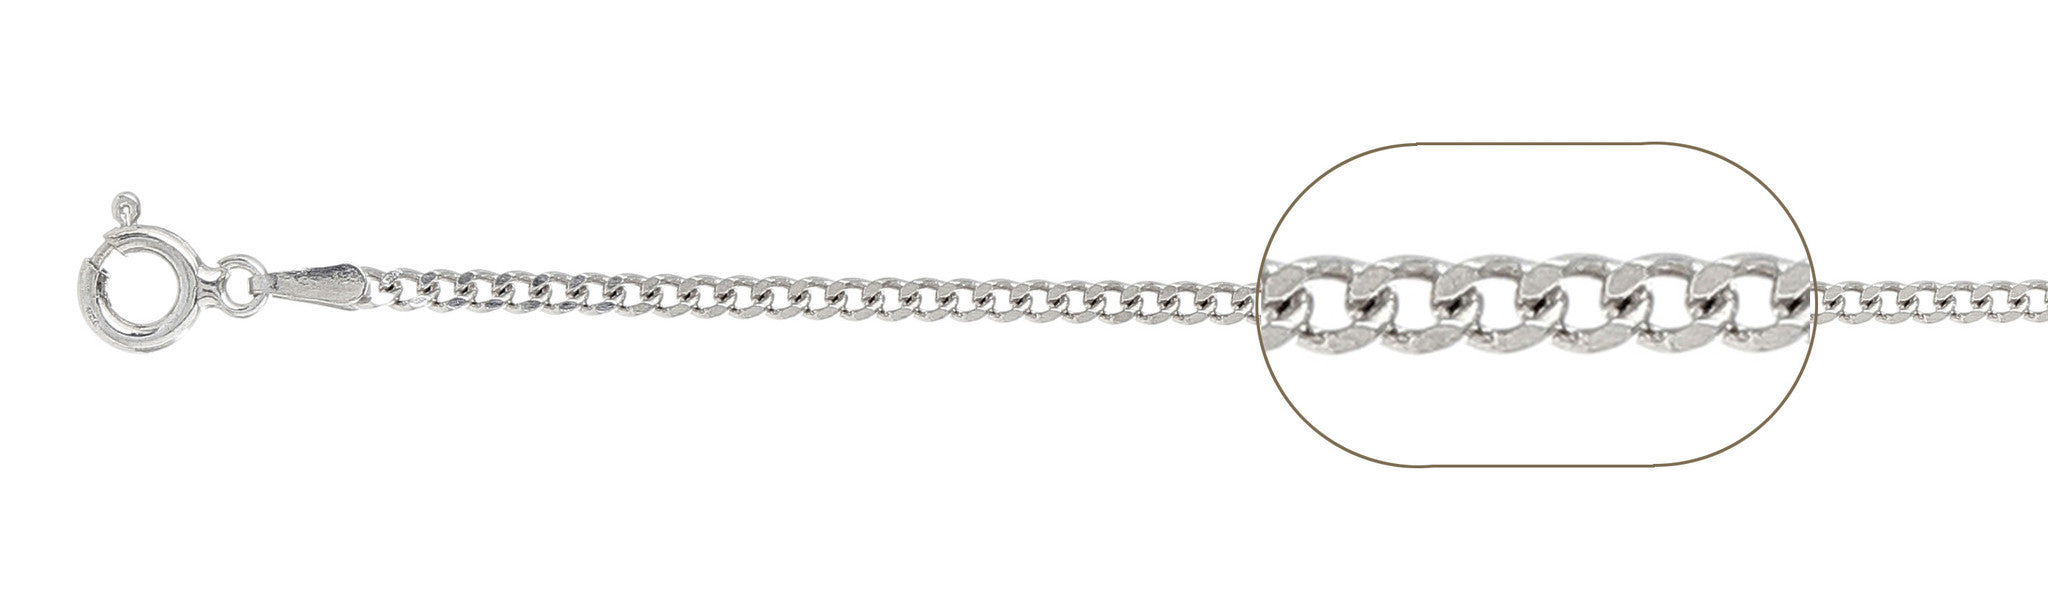 ''050-1.7MM STERLING SILVER Curb Chain Made in Italy Available in 16''''- 30'''' inches''